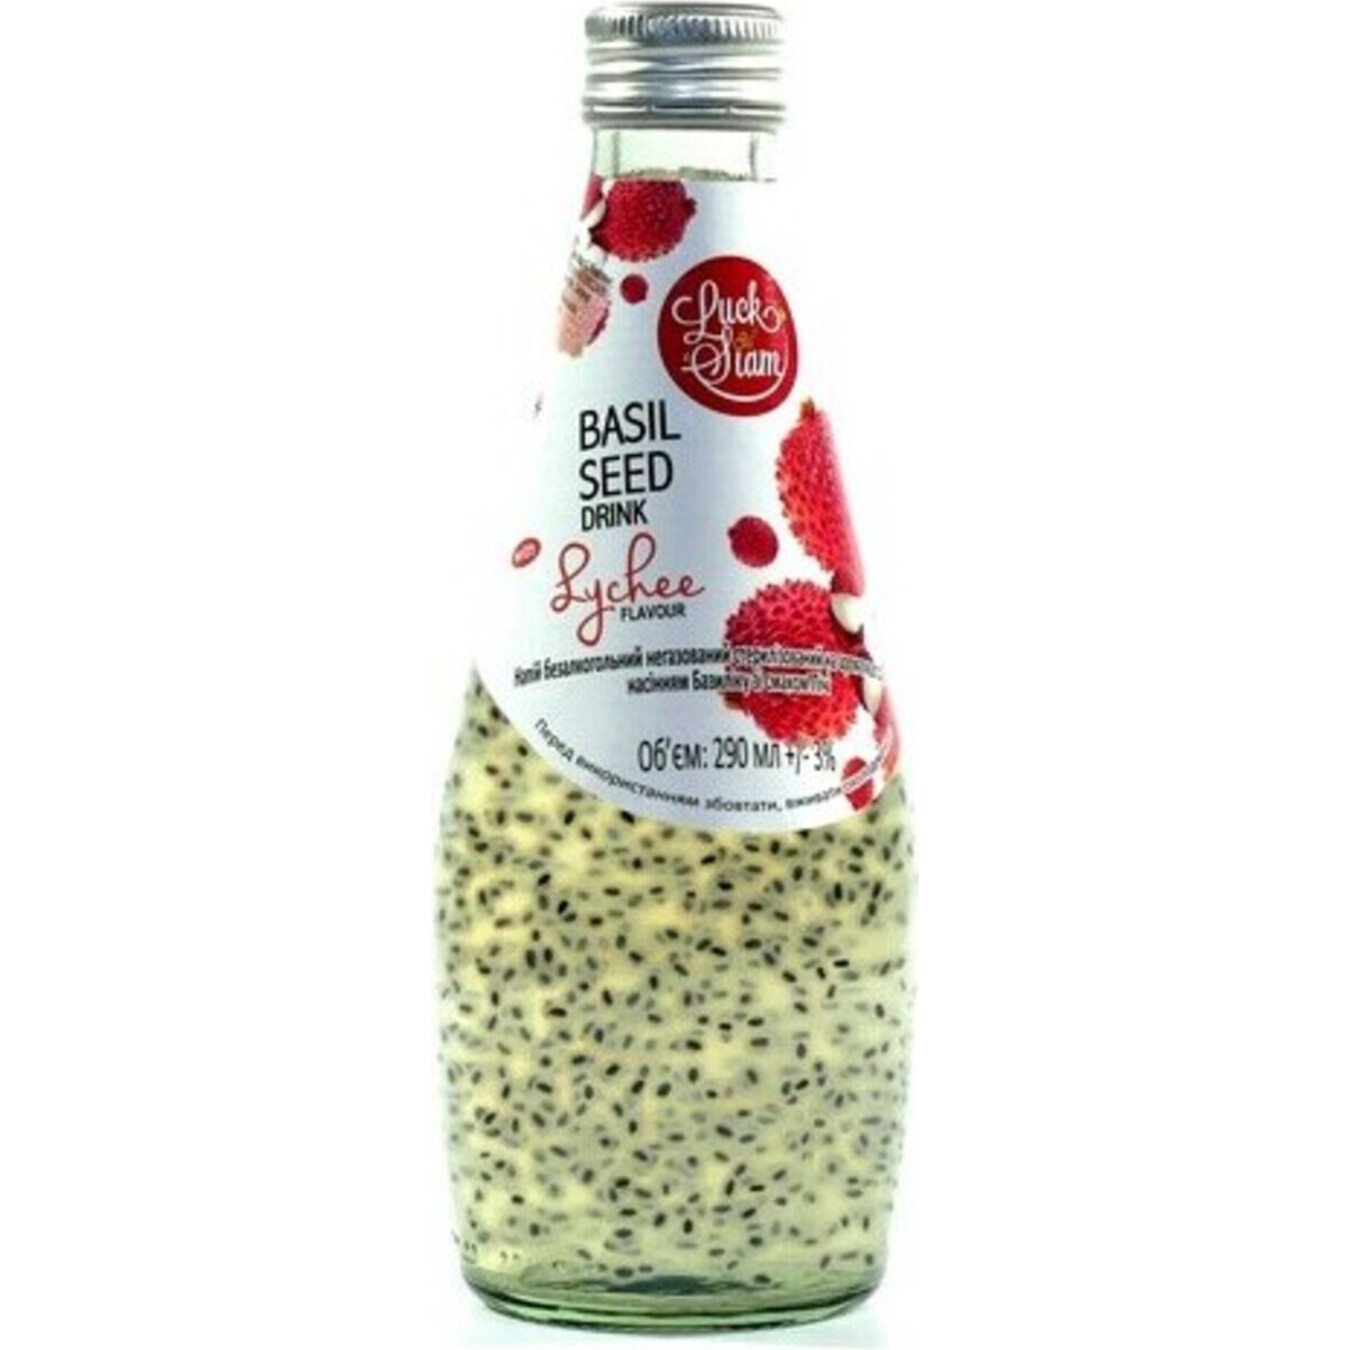 LUCK SIAM non-alcoholic drink with Basil Lychee seeds 0.29 l